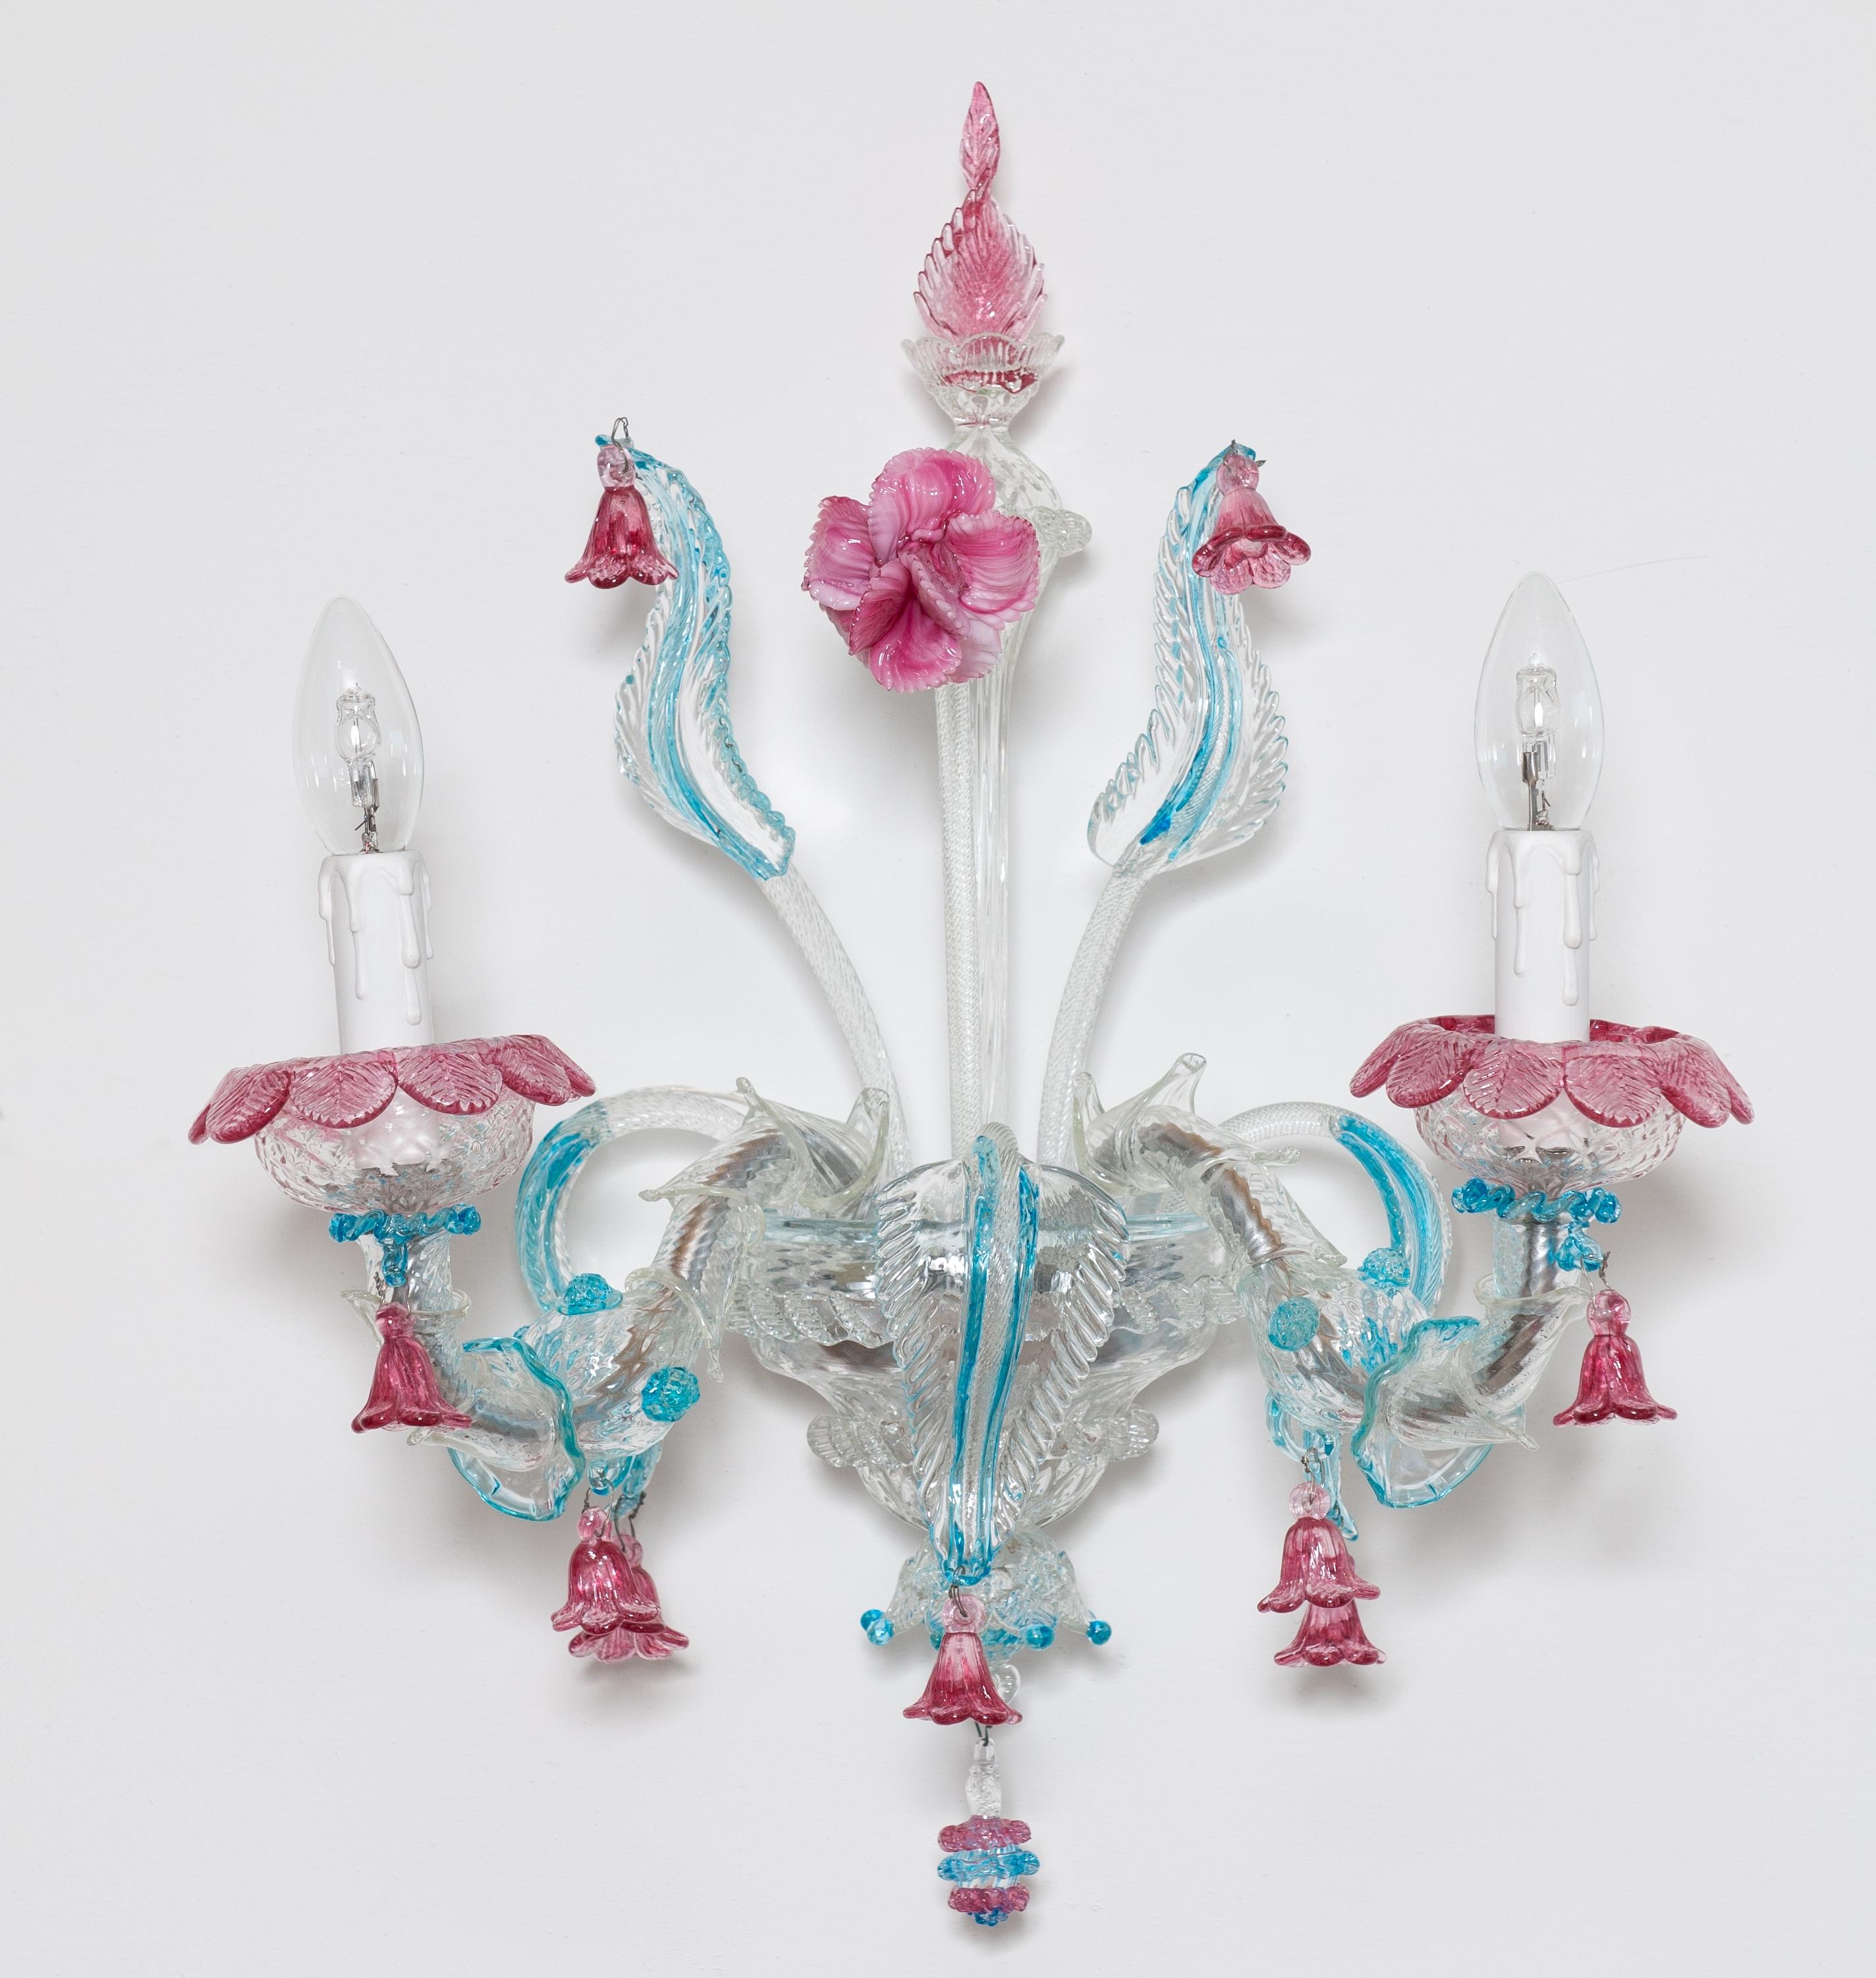 Single Sconce in Blown Murano Glass Pink and Light Blue Rezzonico 1980s Italy.
Gorgeous Italian Sconce in Blown Murano Glass Pink and Light Blue ca rezzonico, 1980s.
This is a portrait, entirely handcrafted in blown Murano glass, in the Italian